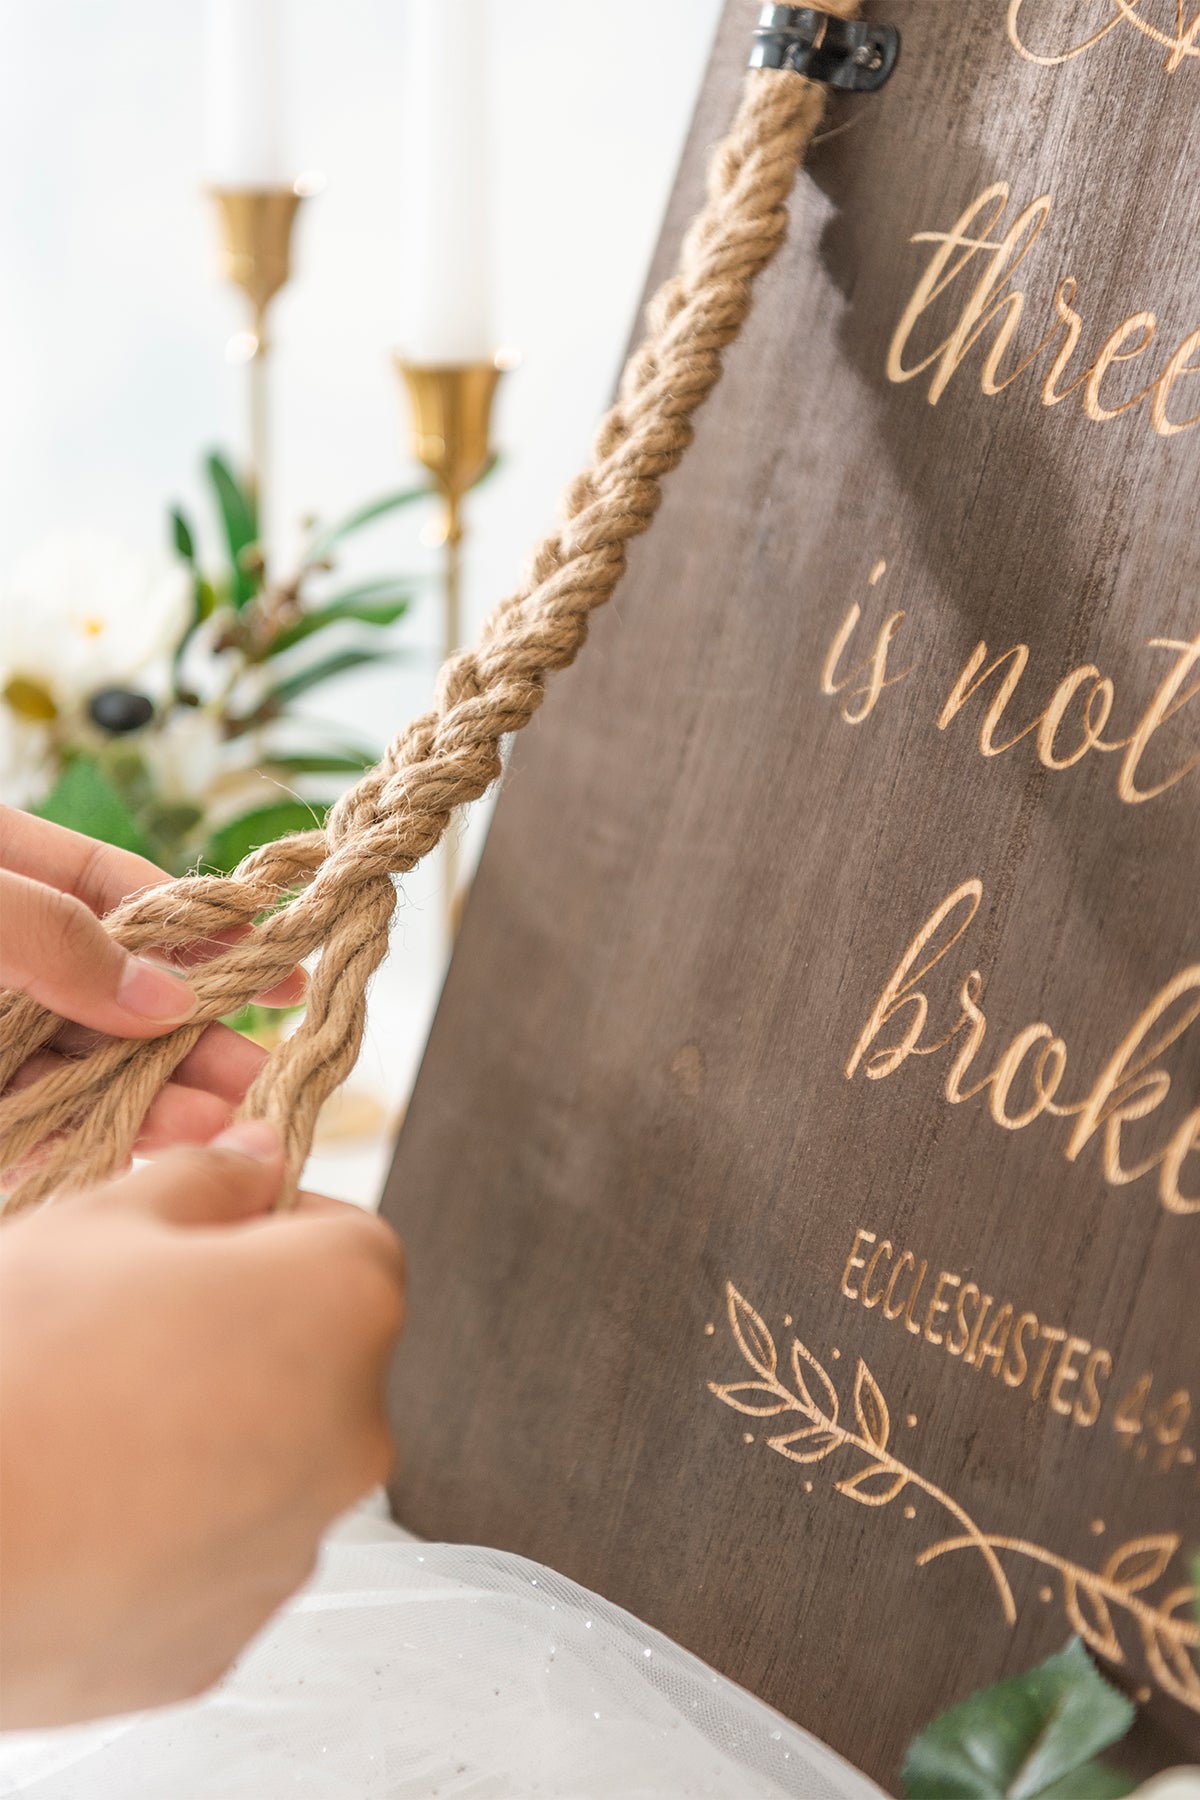 Strand of Three Cords Wedding Ceremony Sign - A Cord of Three Strands is not Easily Broken